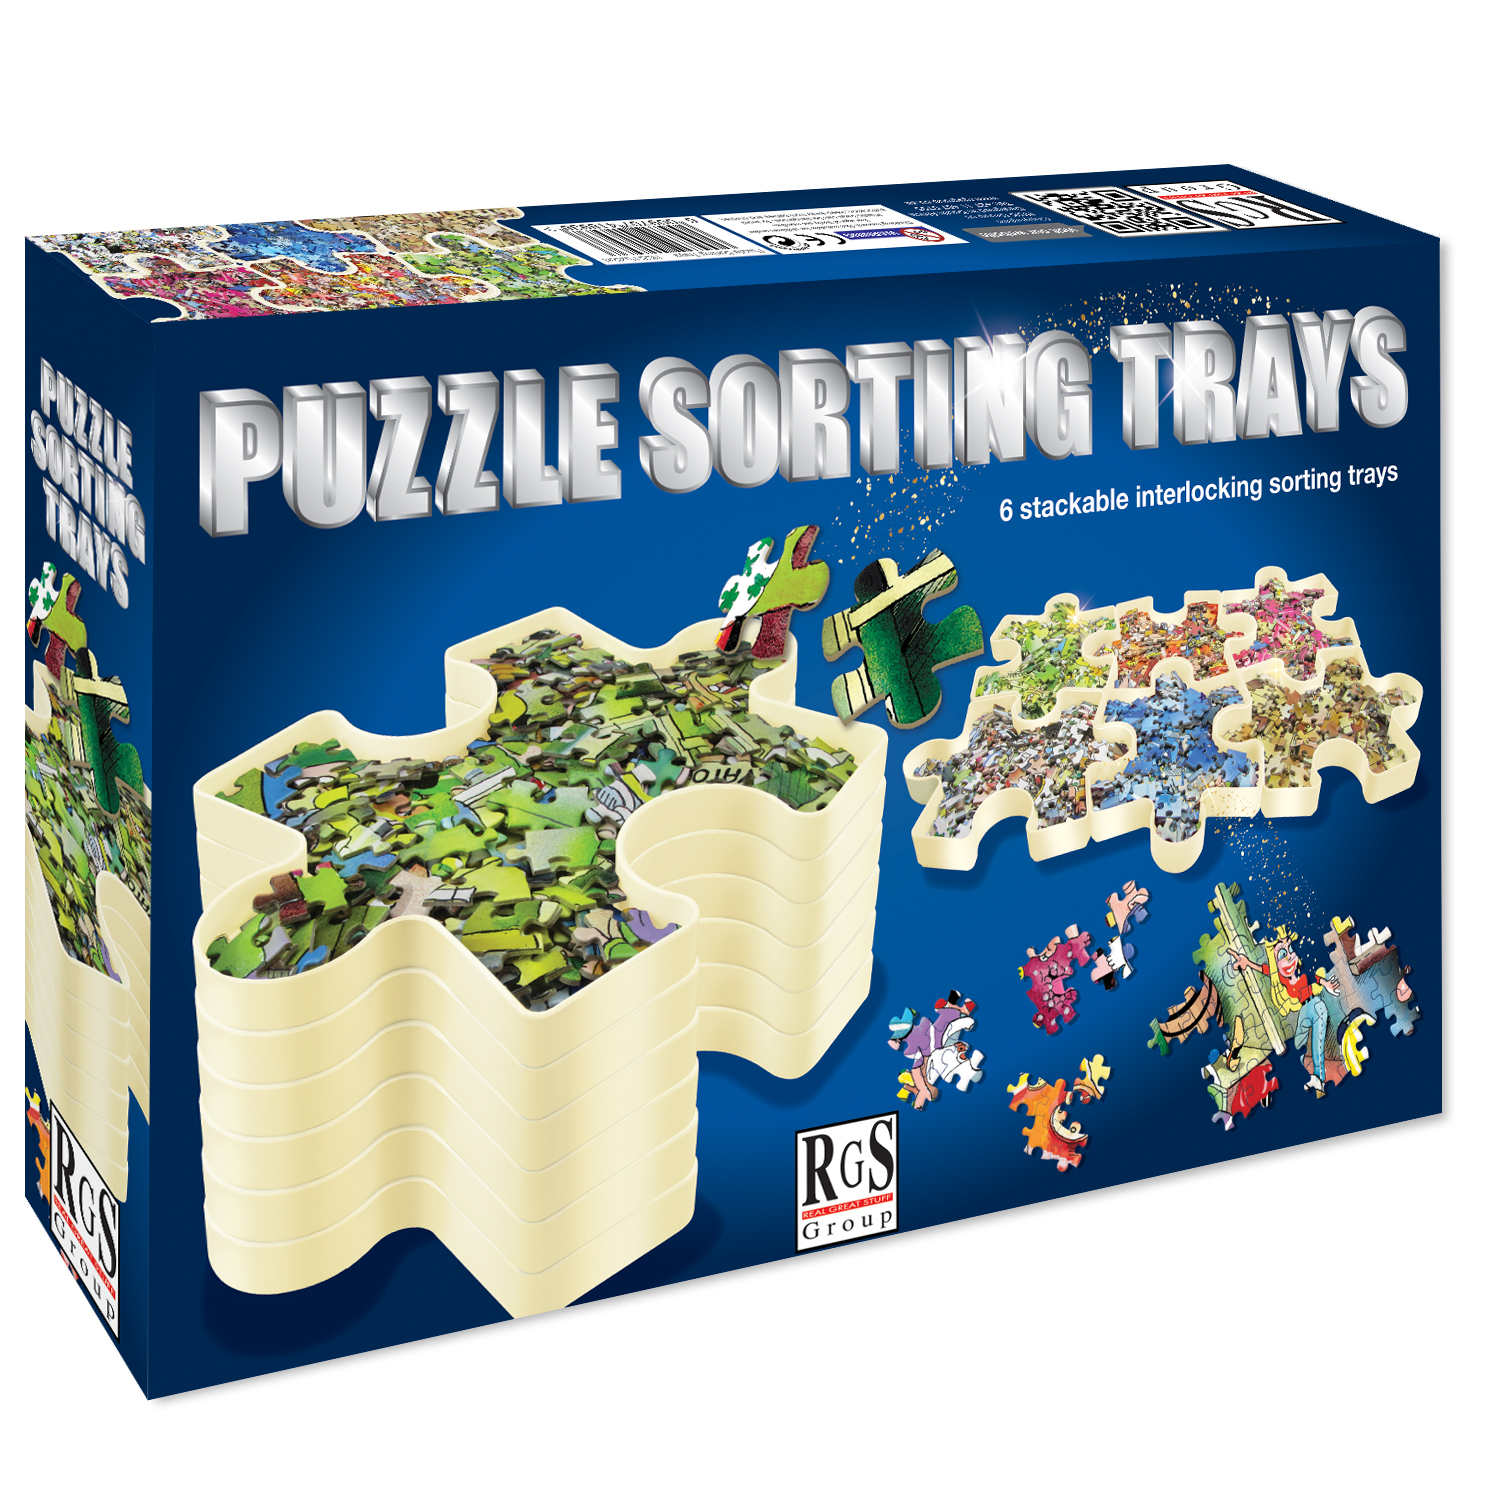 Puzzle sorting trays box